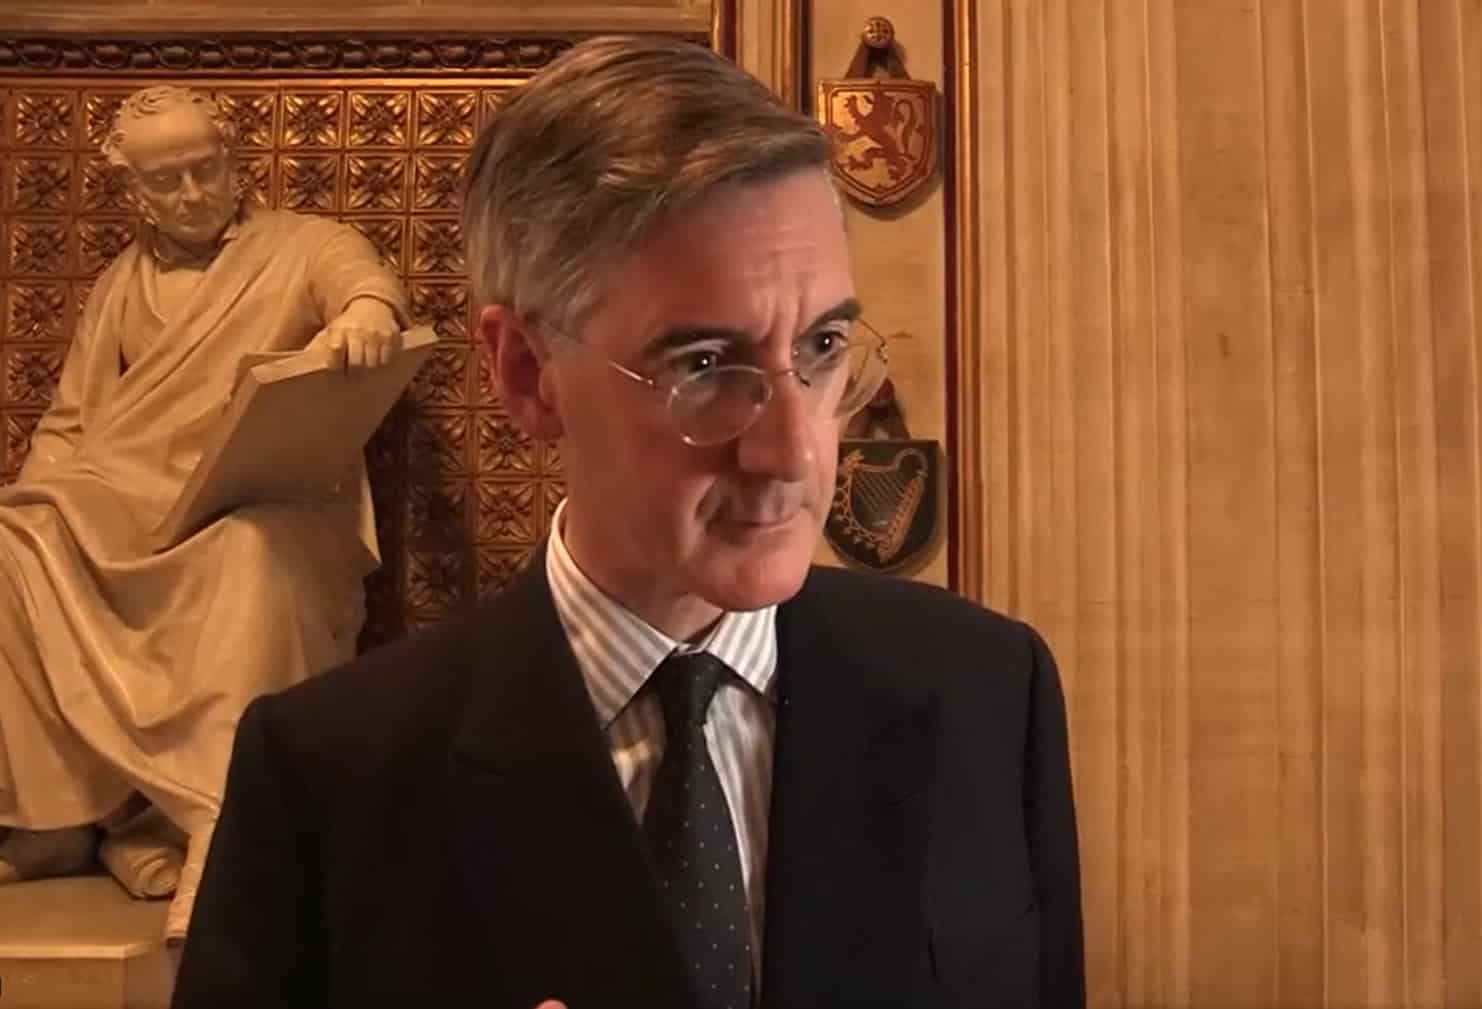 ‘Is that the best you can do?’: Rees-Mogg ripped to shreds over soaring food prices